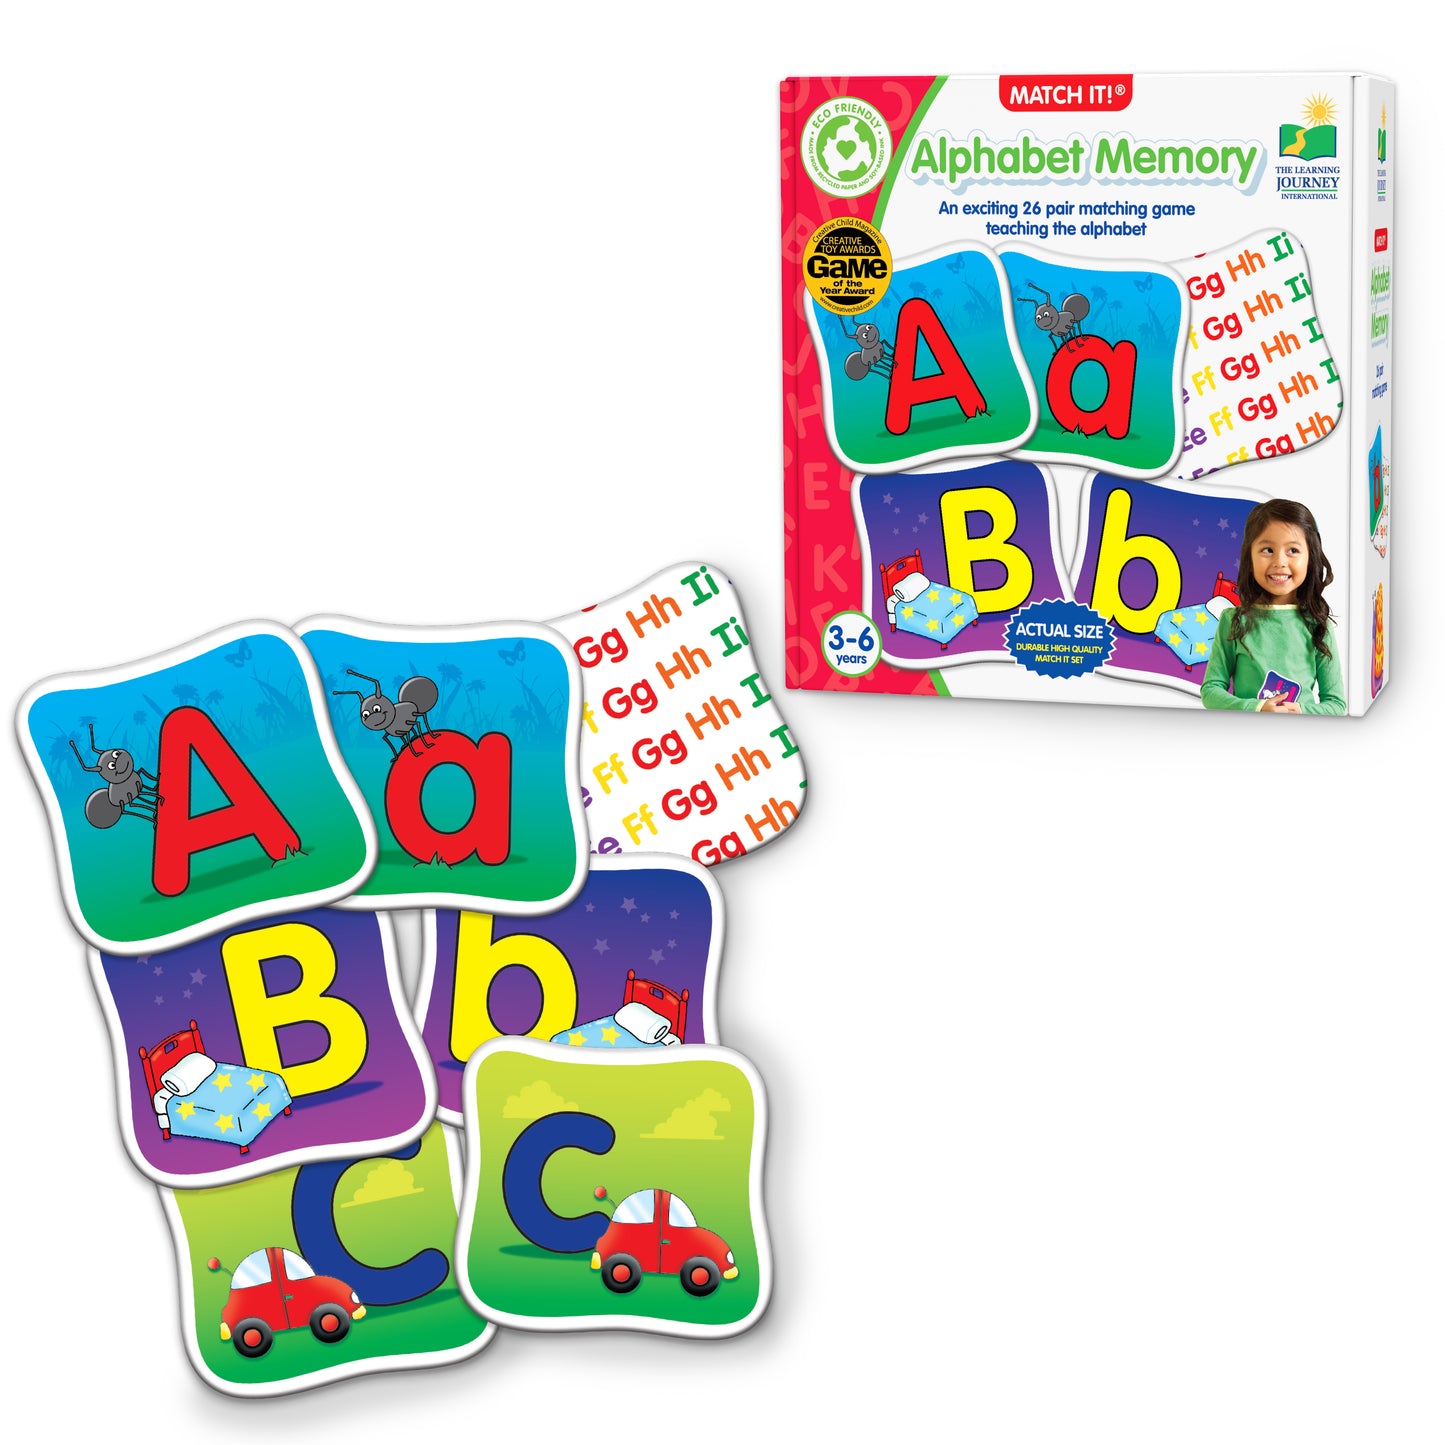 Match It - Alphabet Memory product and packaging